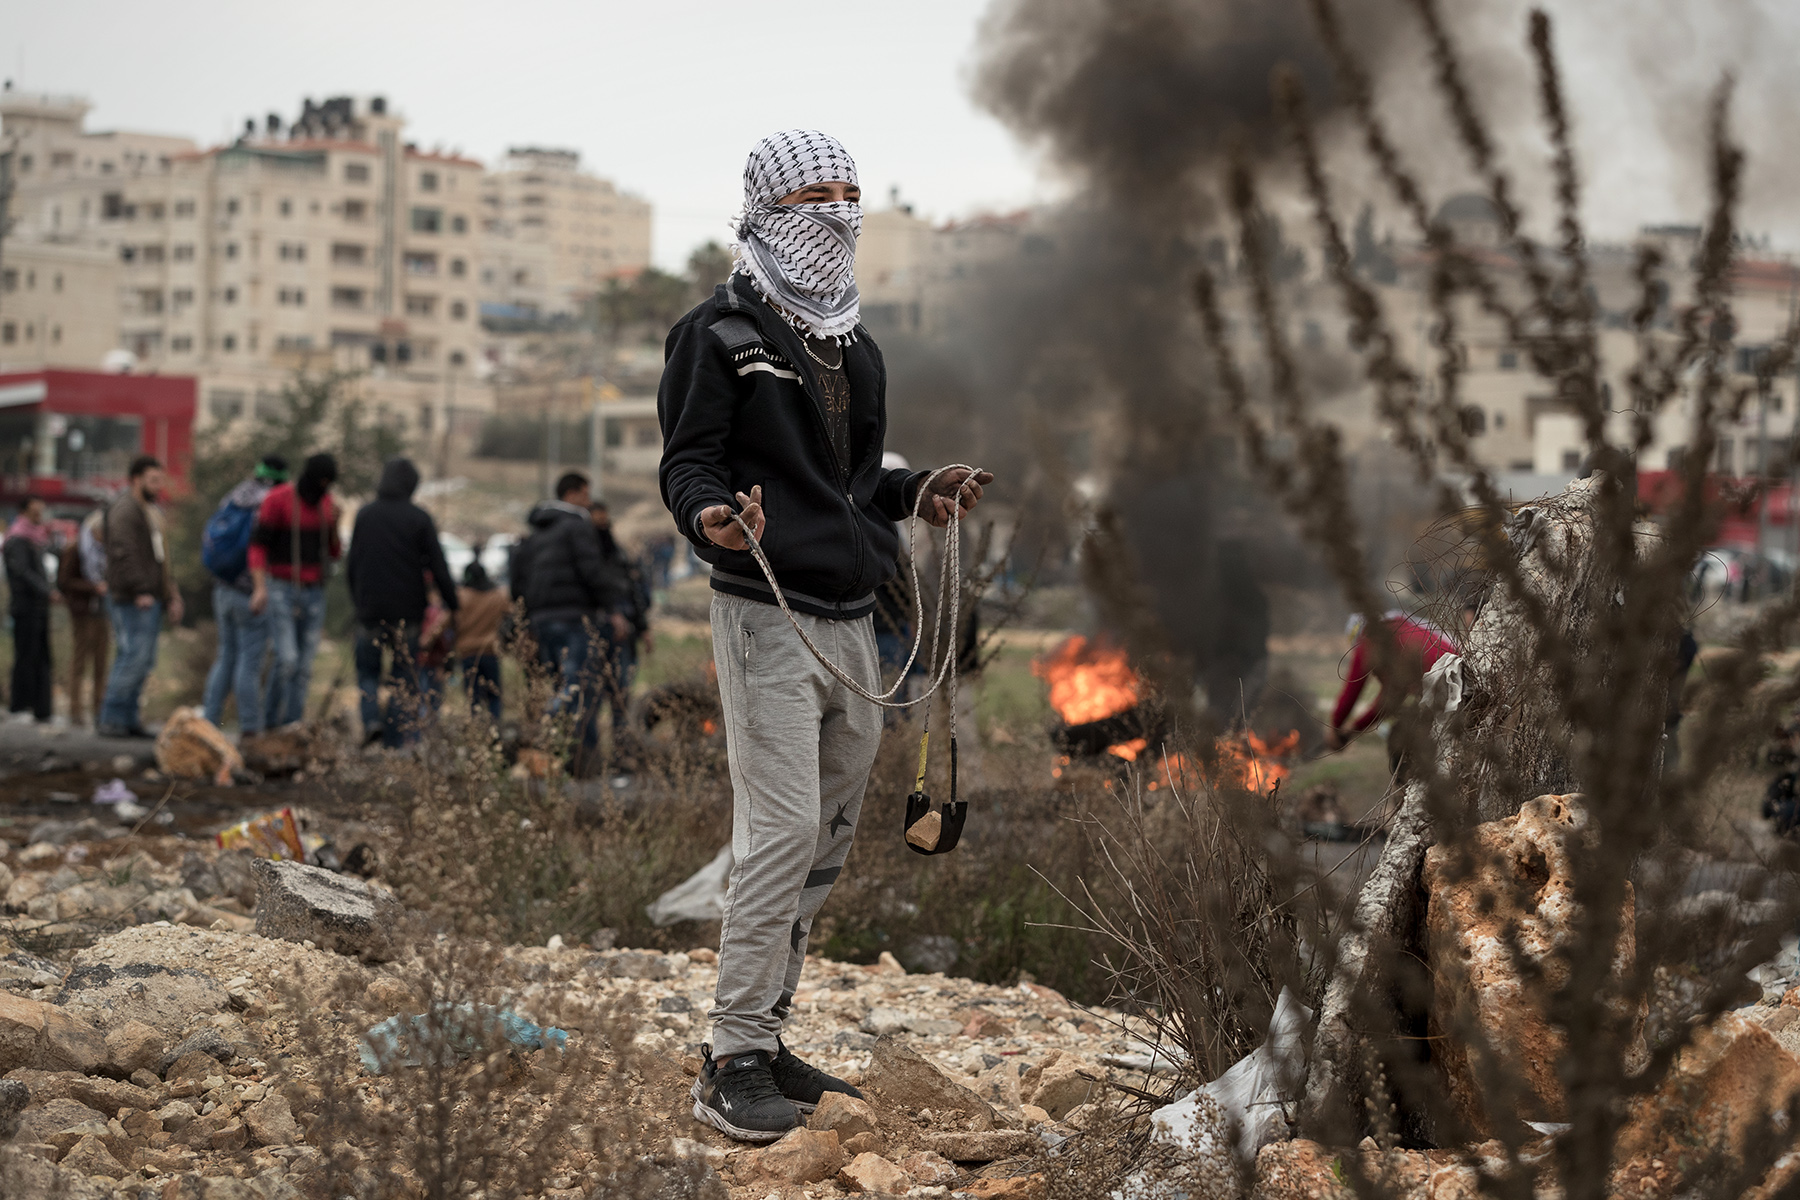 West Bank, December 2017 - Young Palestinians clash with Israeli soldiers following US president Donald Trump statement on Jerusalem status.